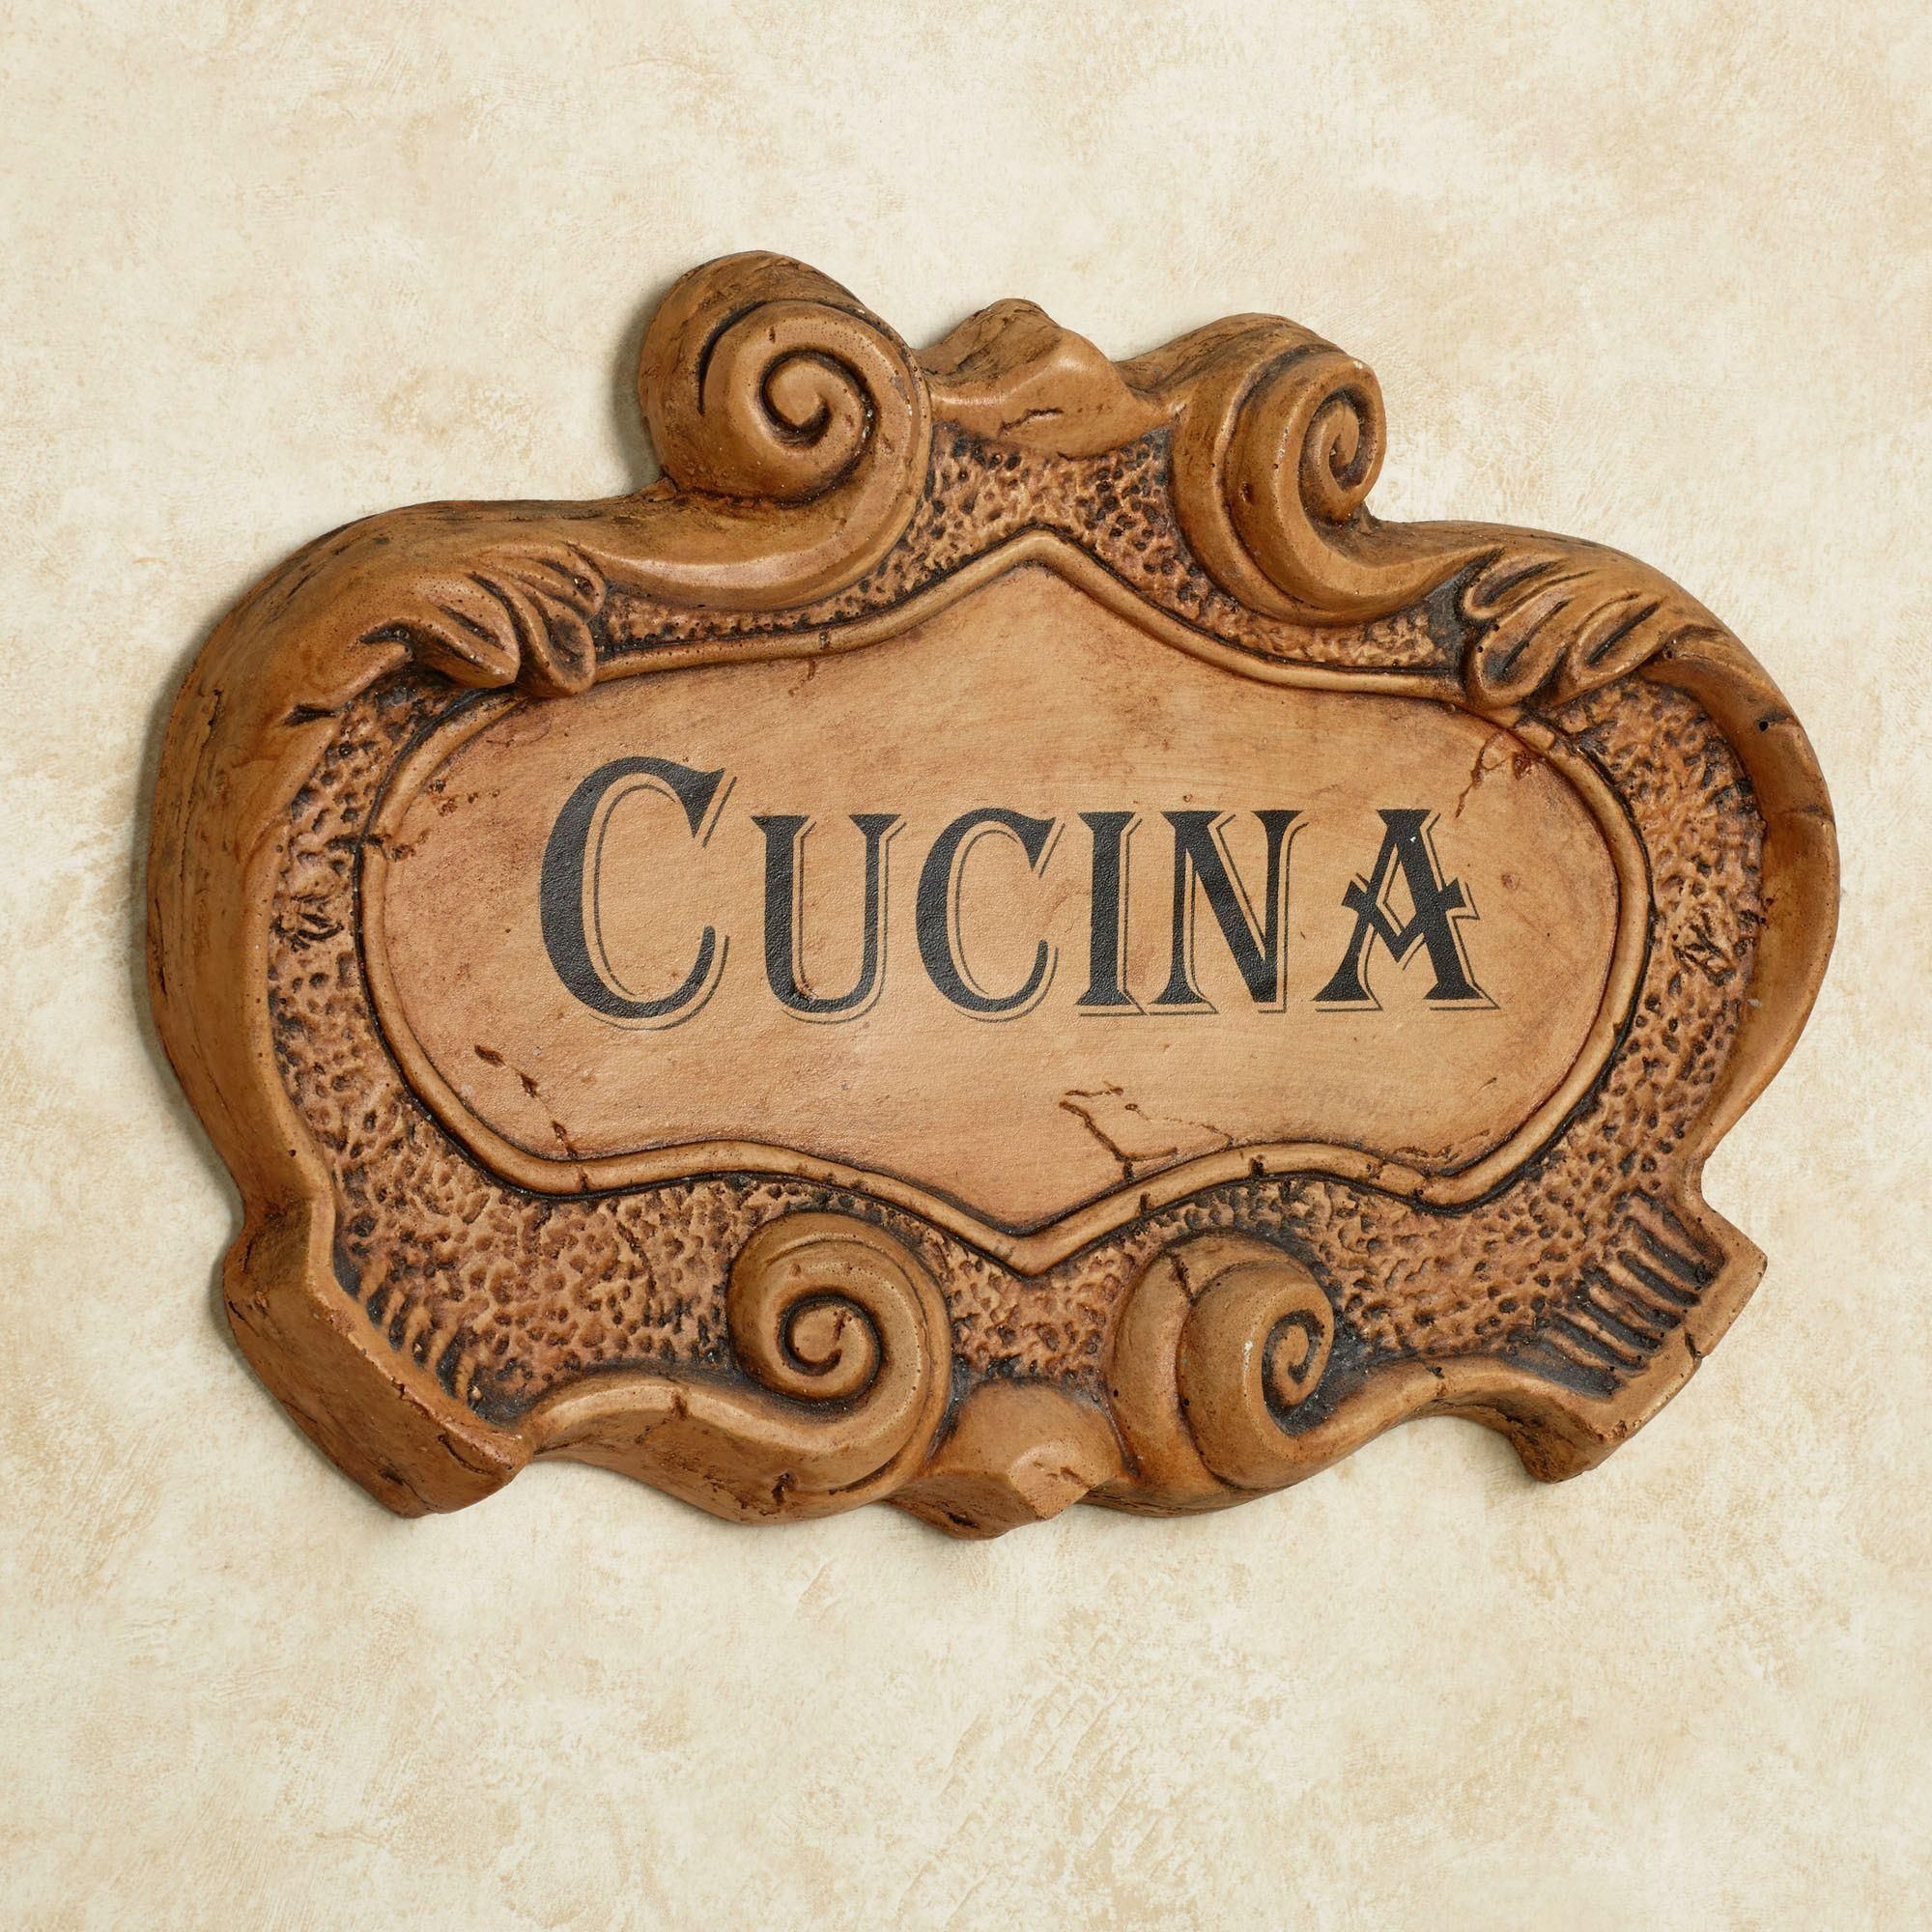 Cucina Italian Kitchen Wall Plaque Pertaining To Cucina Wall Art Decors (View 1 of 20)